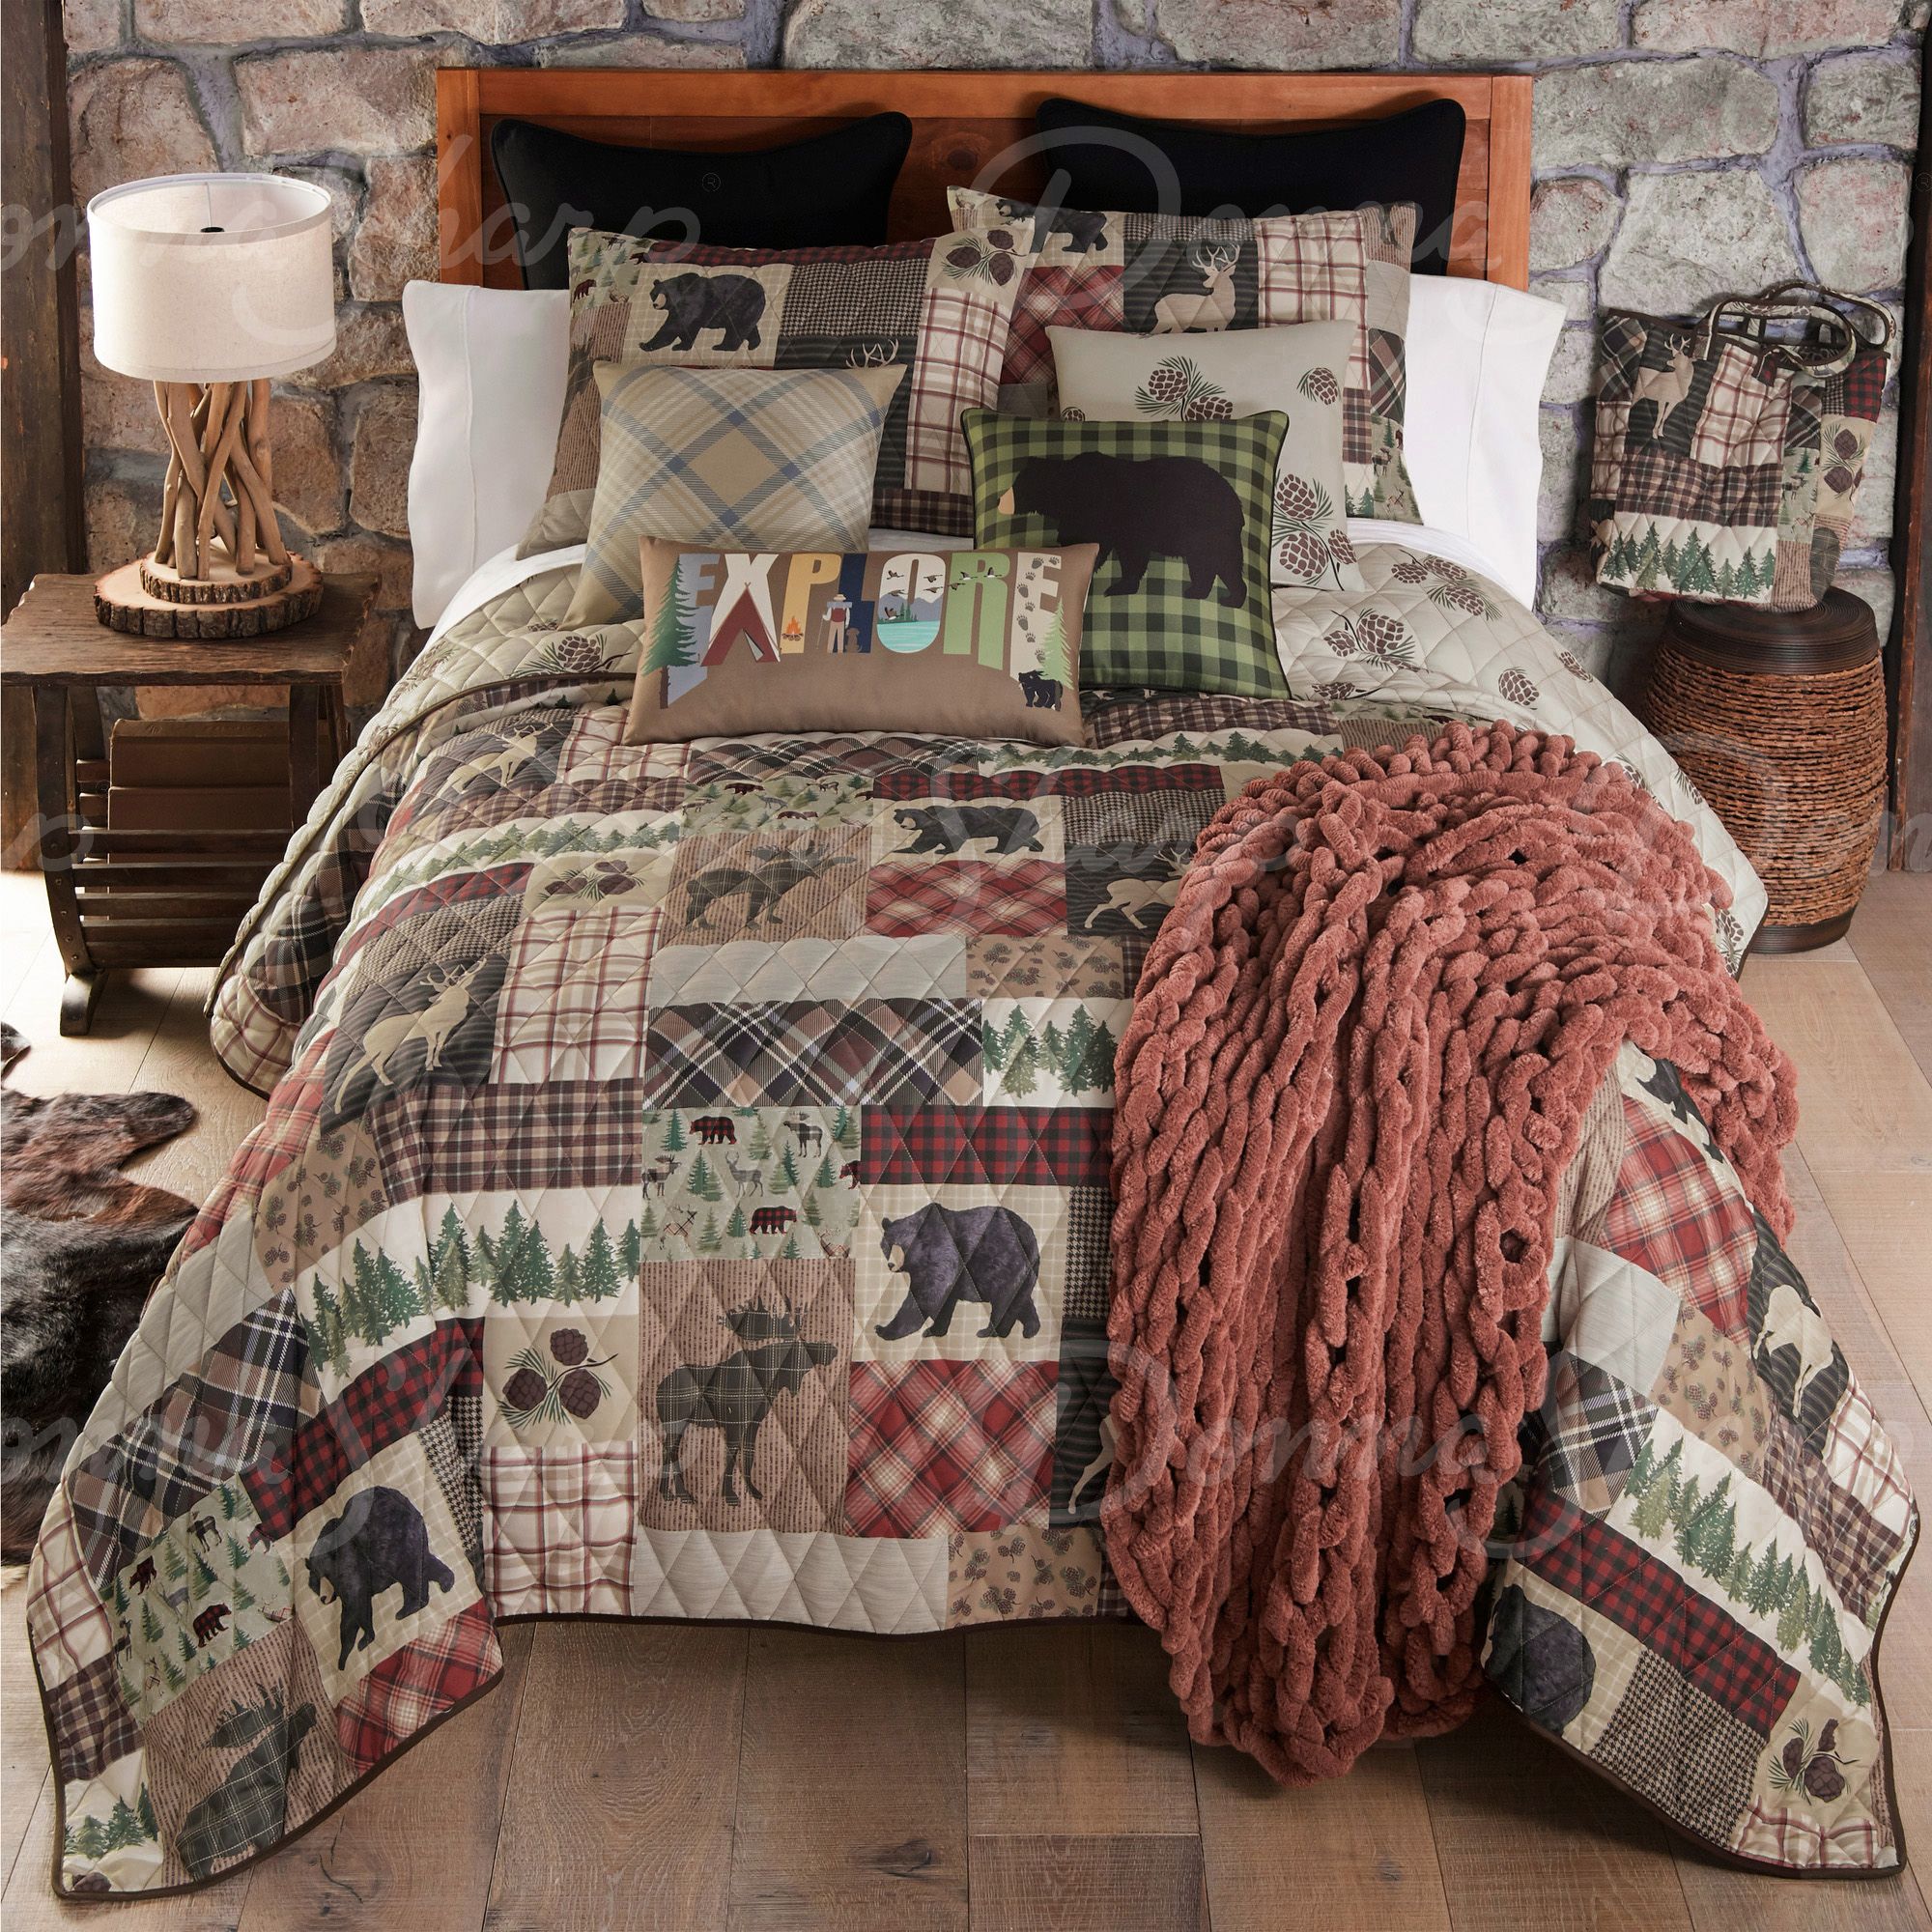 Donna Sharp Comforters and Bedding Accessories